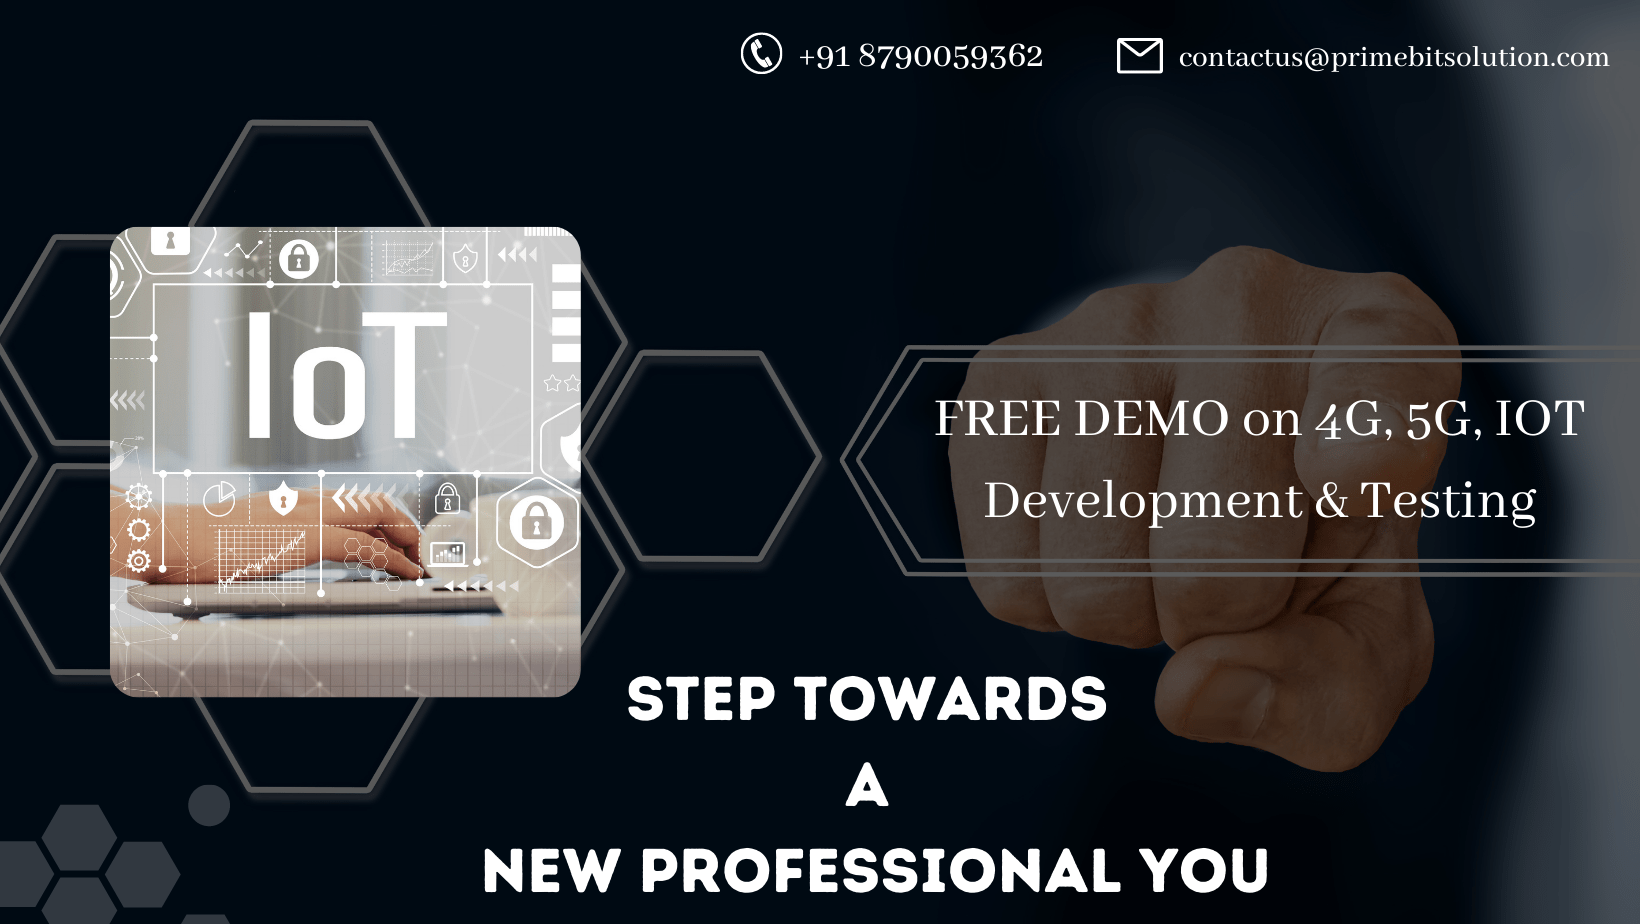 Step towards a new professional you. We at PRIMEBIT provide FREE DEMO on 4G, 5G, IOT Development & Testing